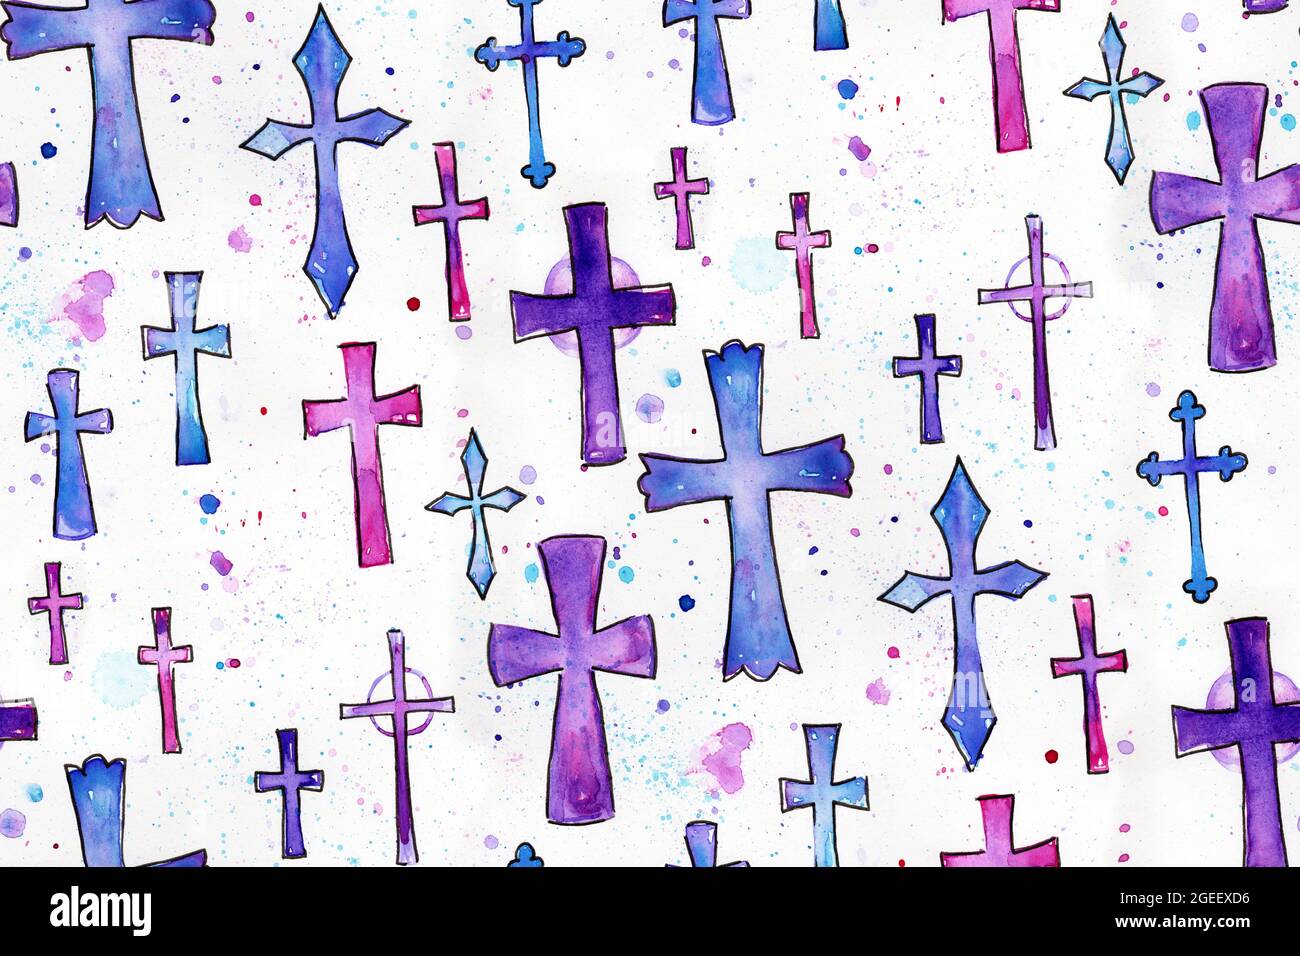 Watercolored Christian Crosses in a Seamless Pattern Stock Photo